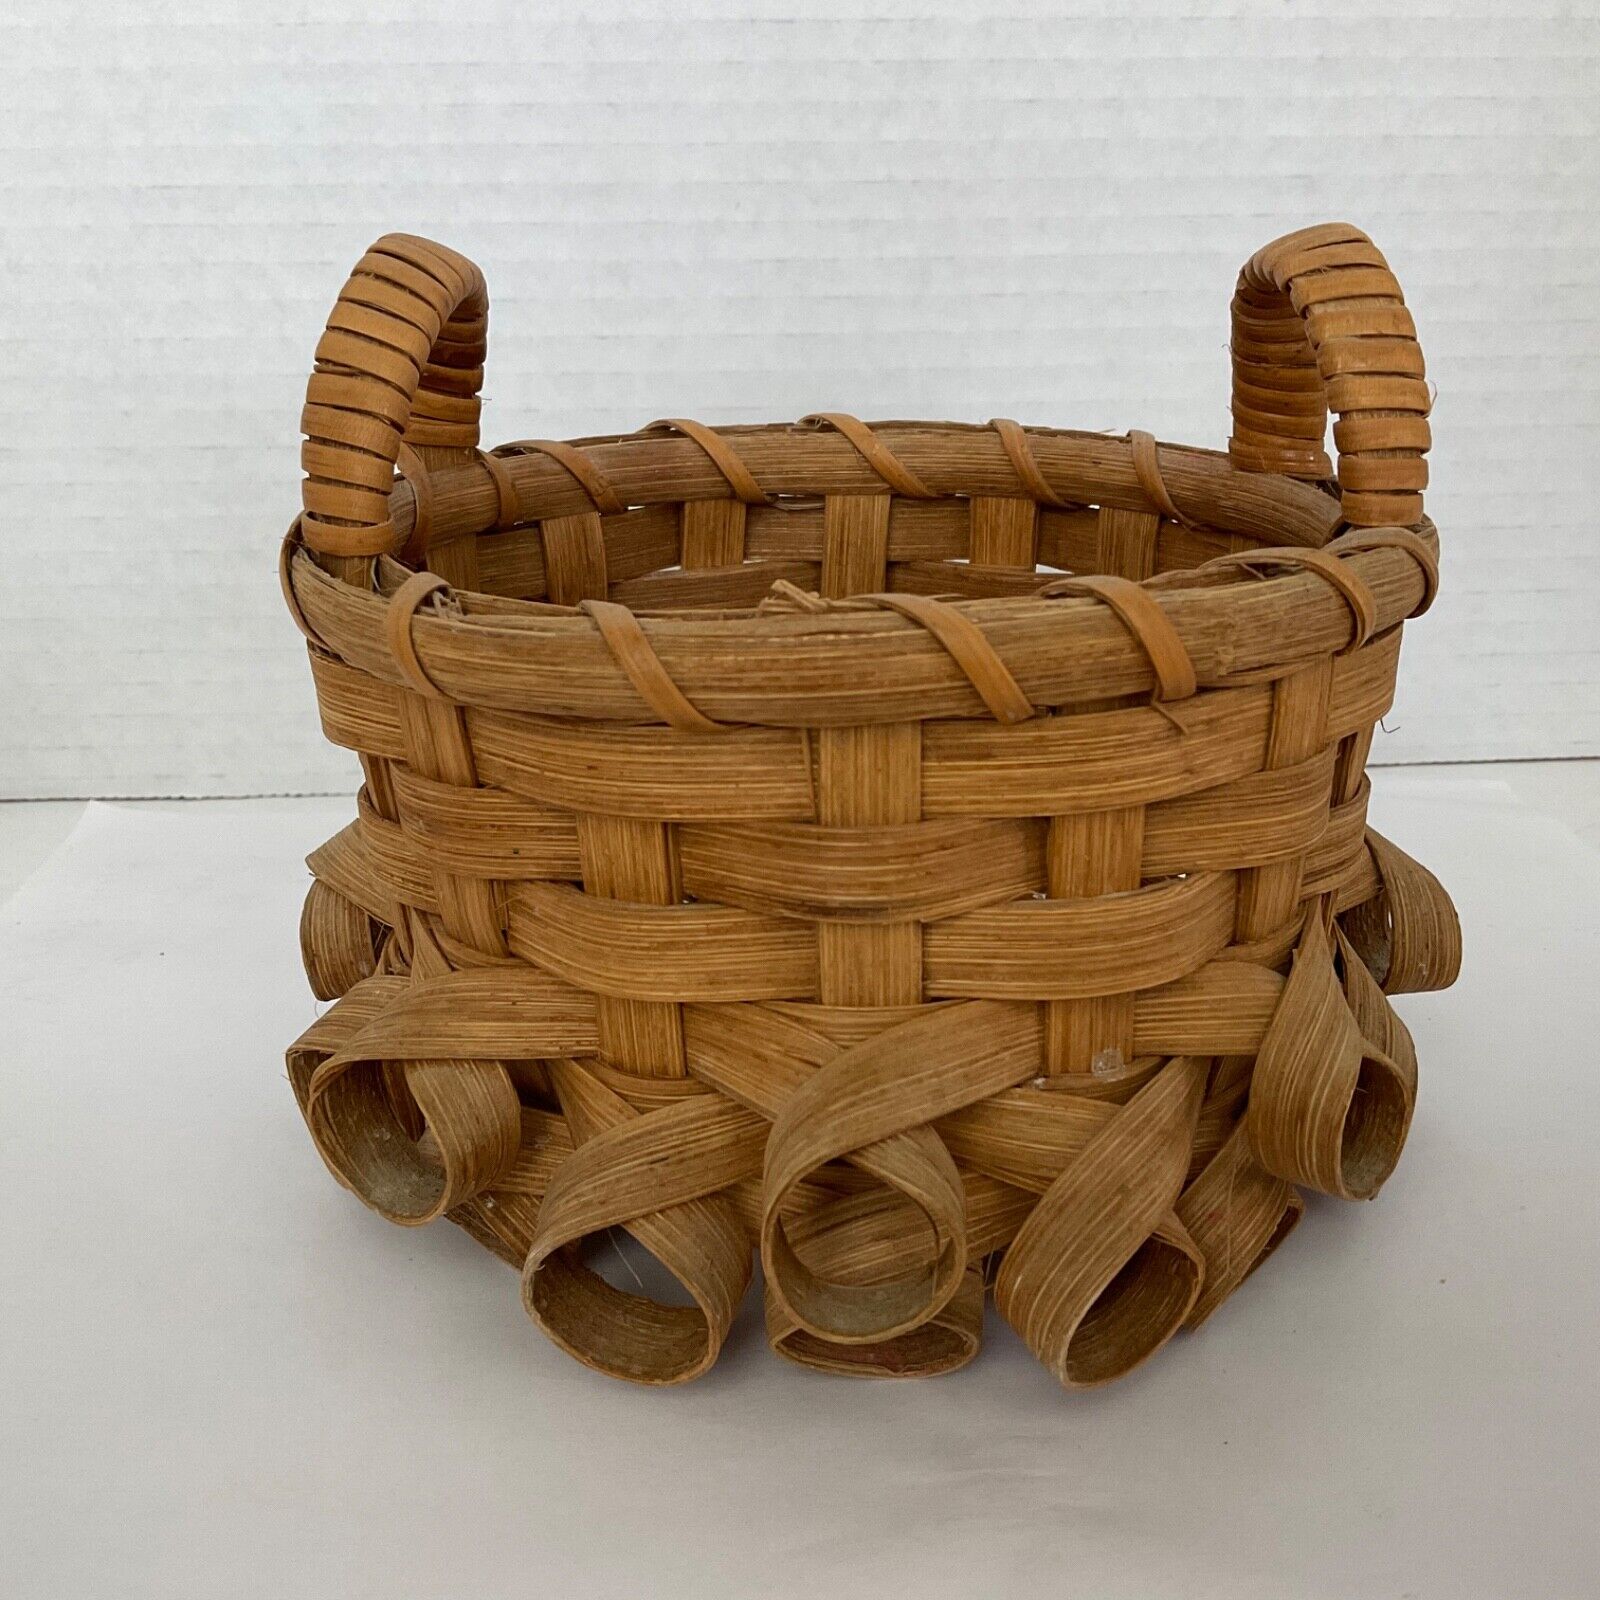 Handcrafted Wicker Basket with Handles Signed G. Kabel 1985 Small 5” Round